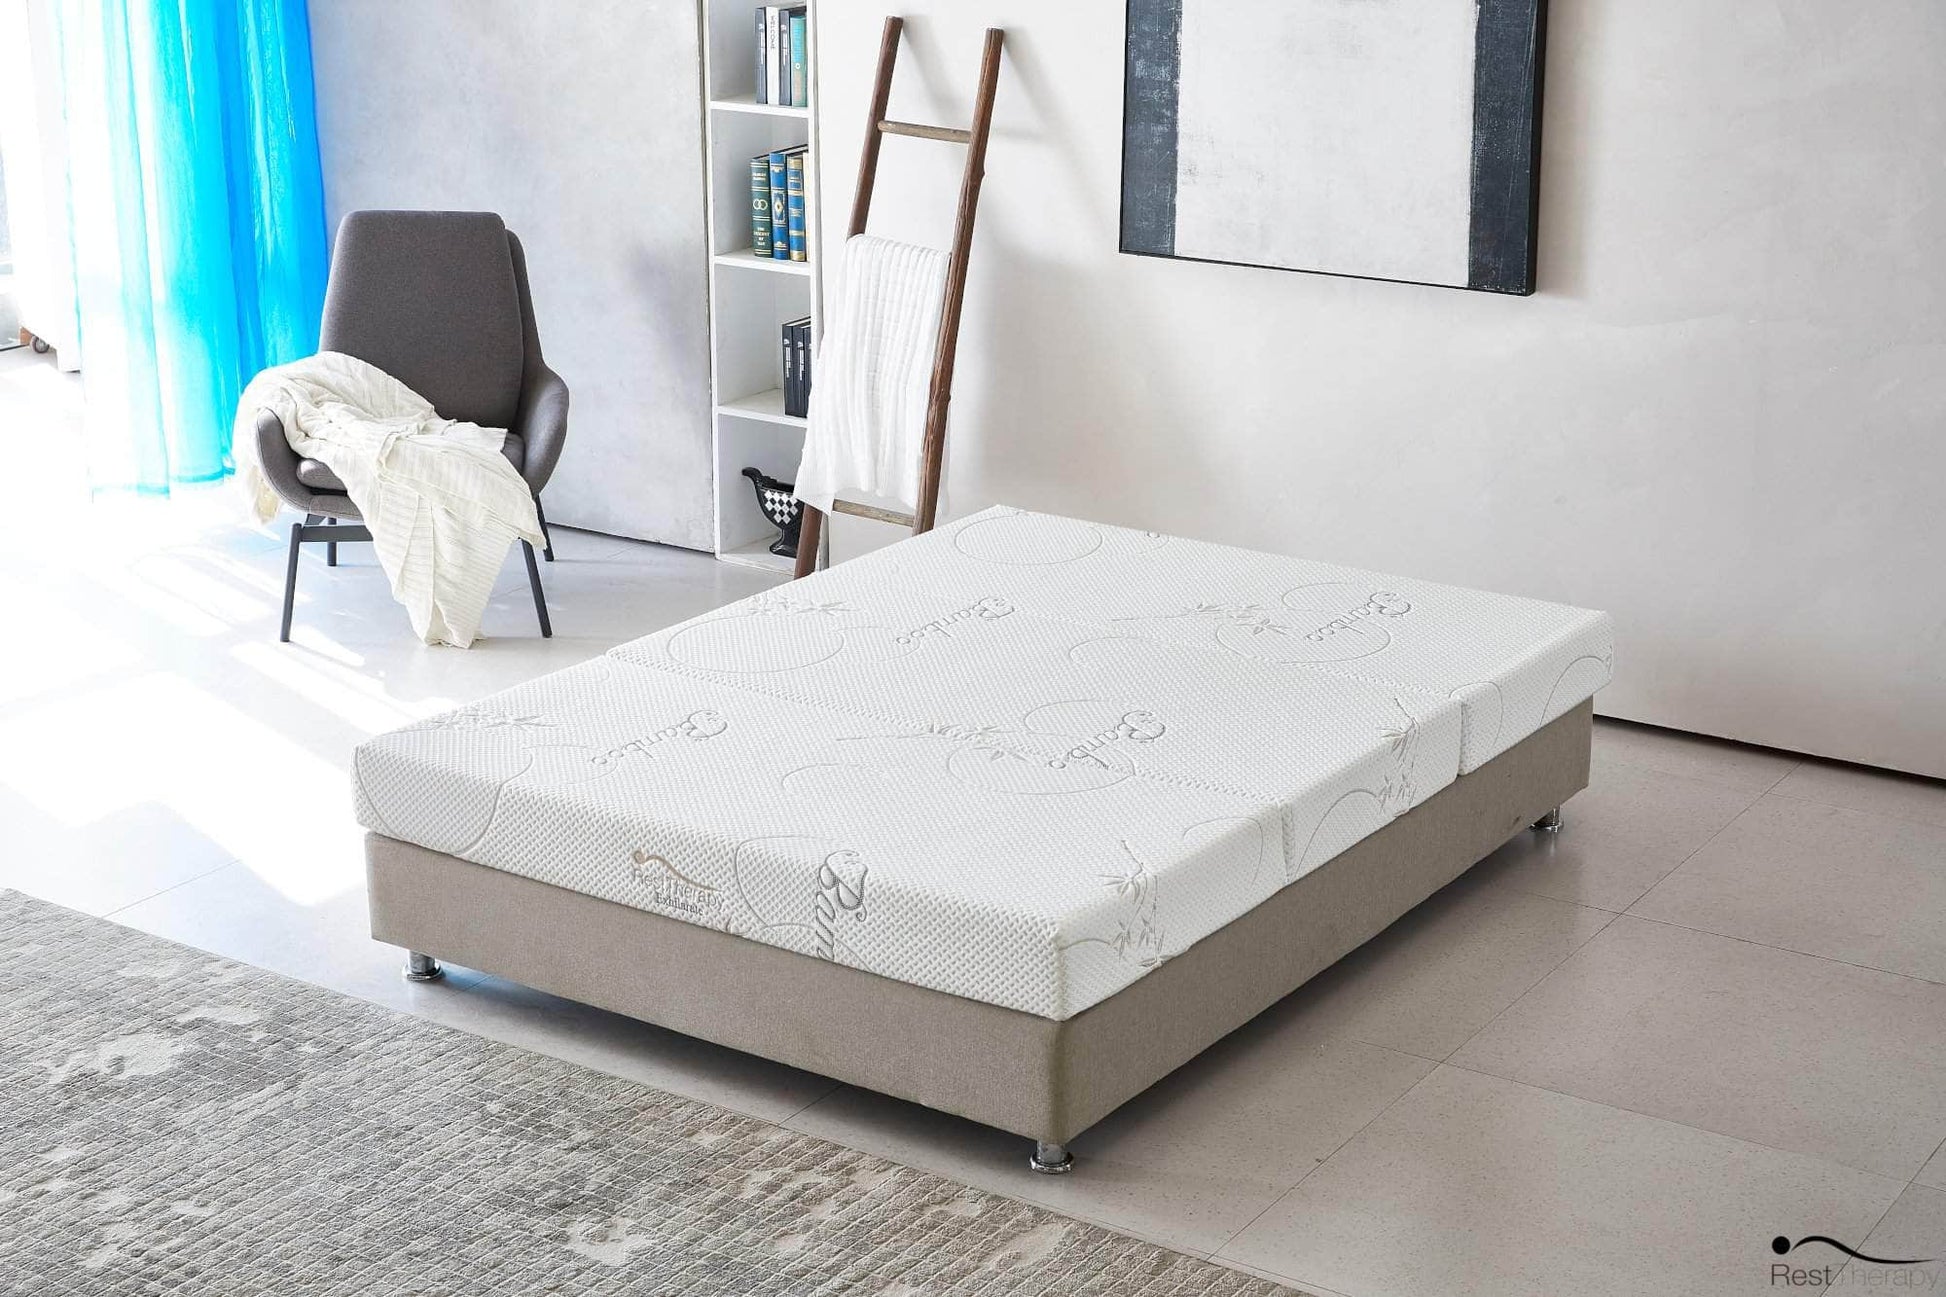 Rest Therapy Mattress 6 Inch Exhilarate Tri Fold Bamboo Cool Gel Memory Foam Mattress - Available in 3 Sizes